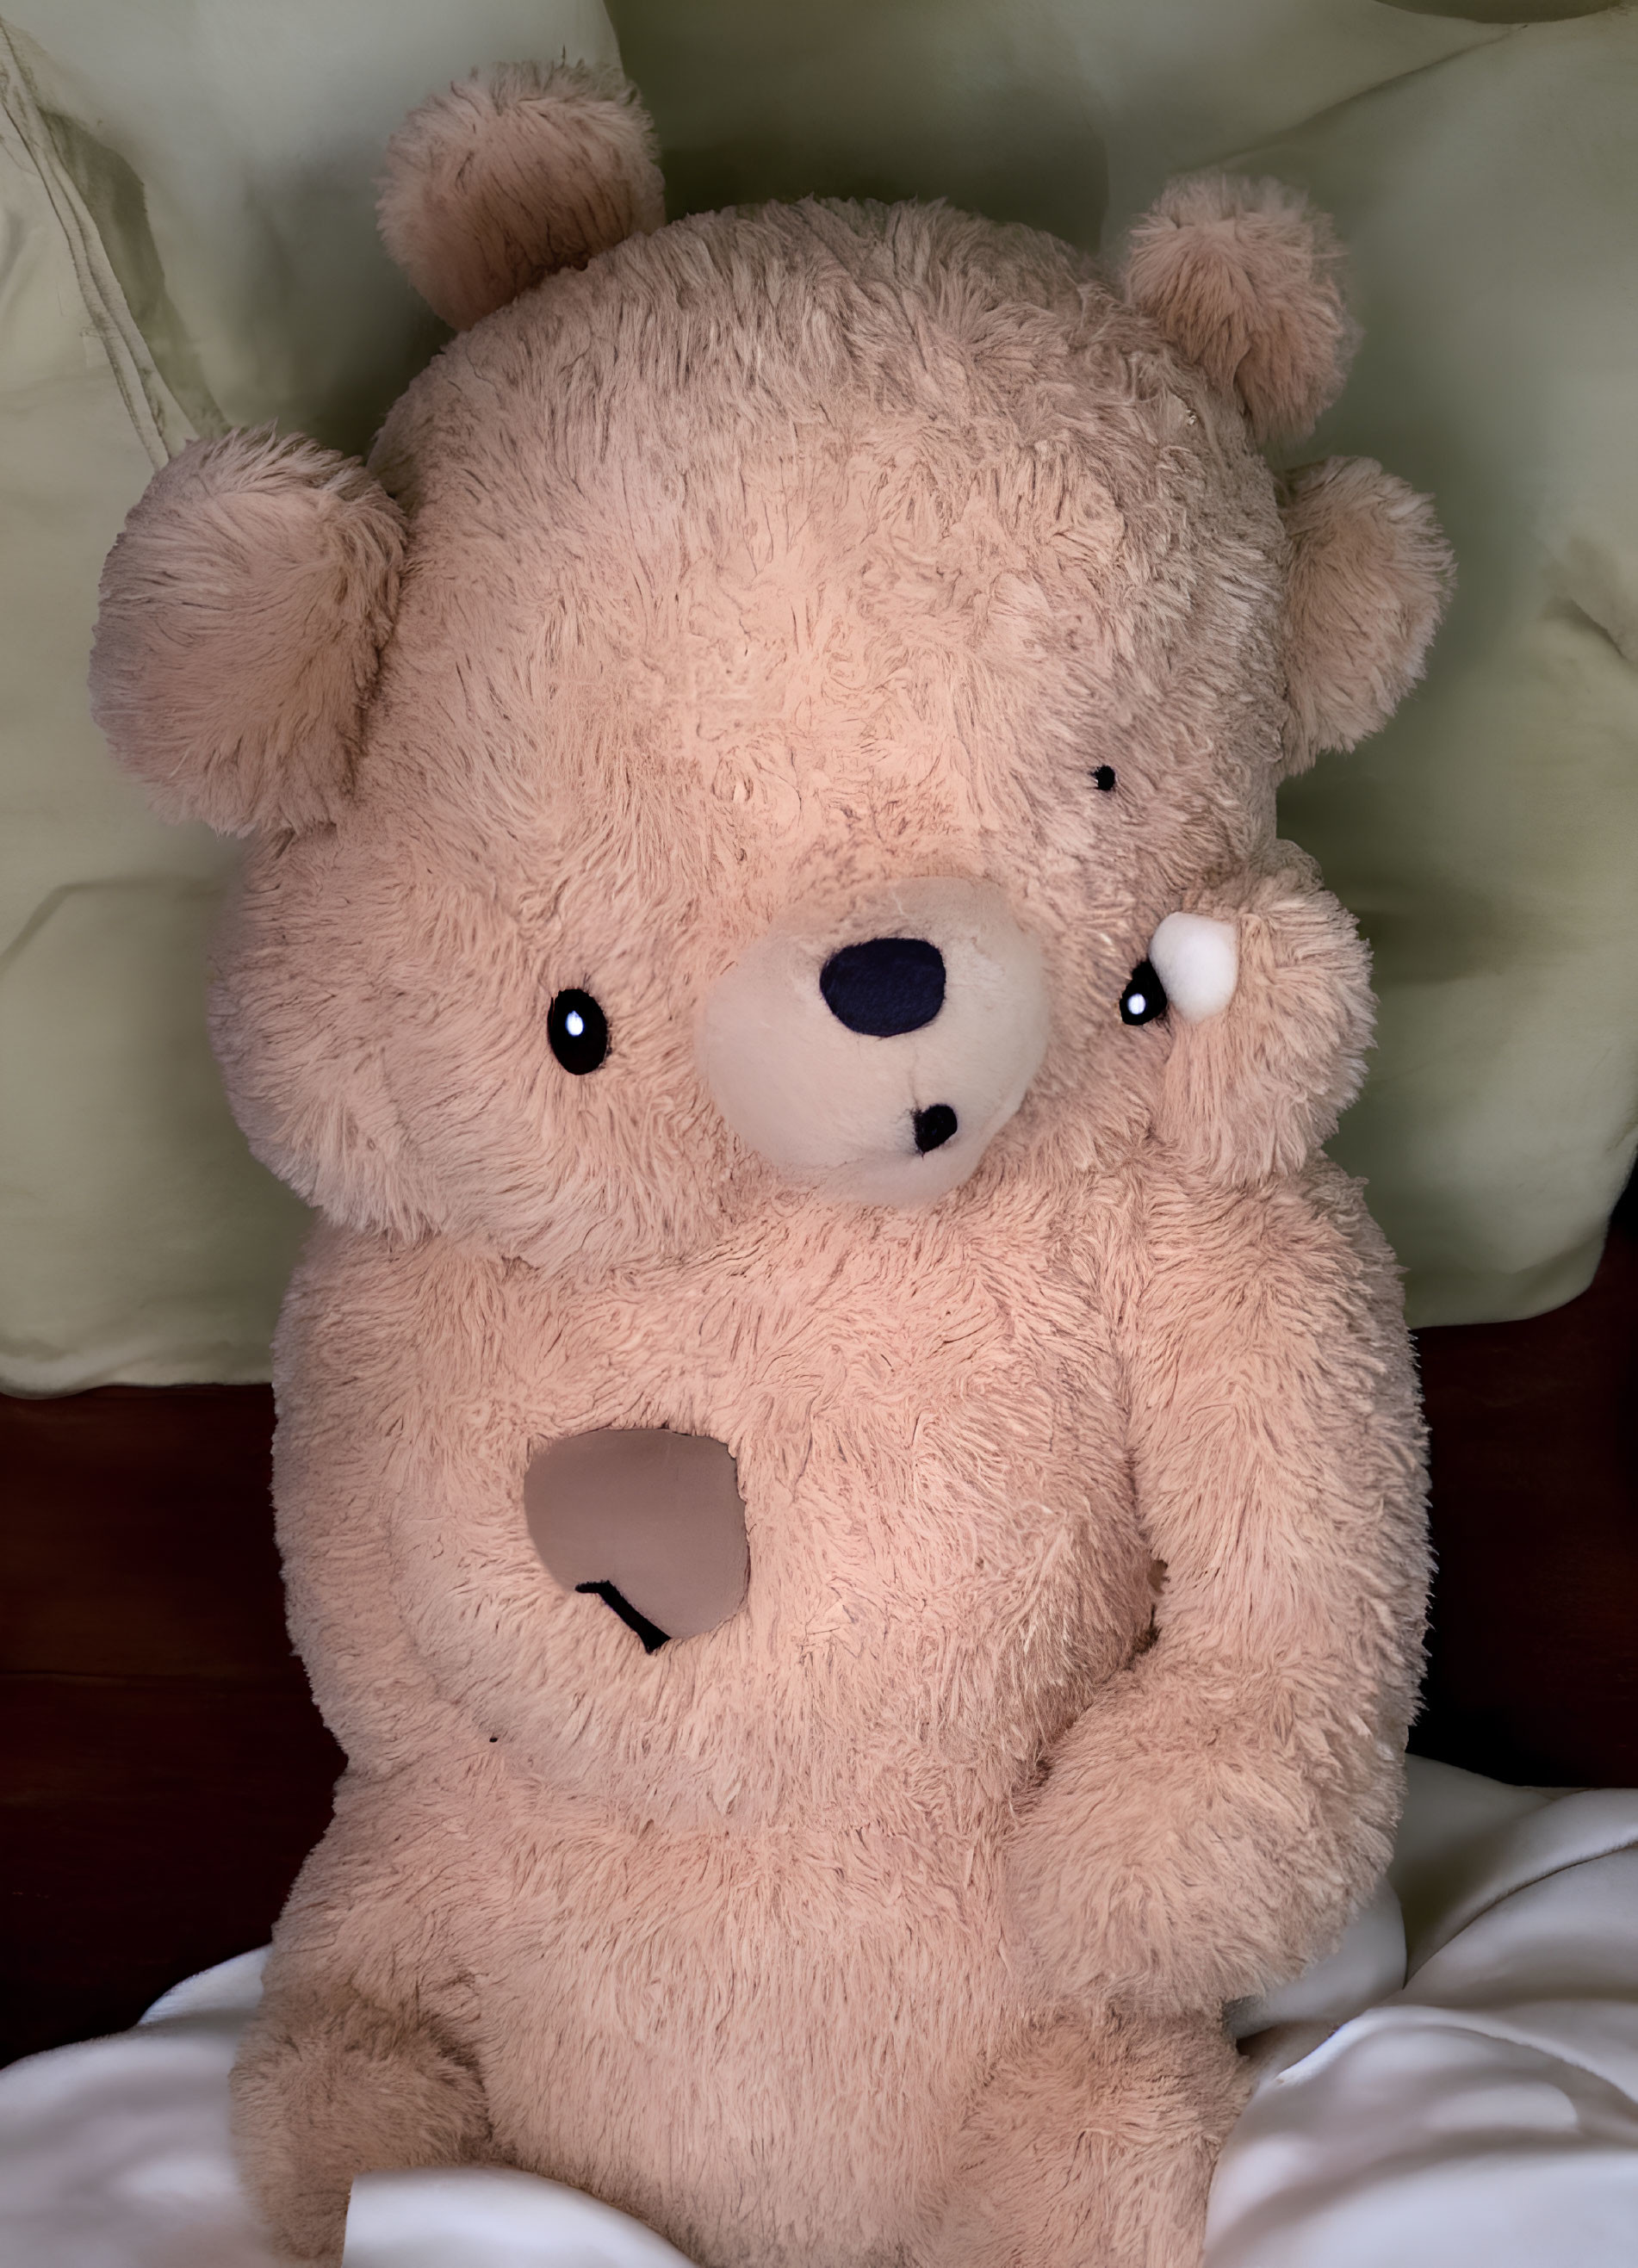 Plush teddy bear with missing eye and heart-shaped hole on chest on green pillow bed